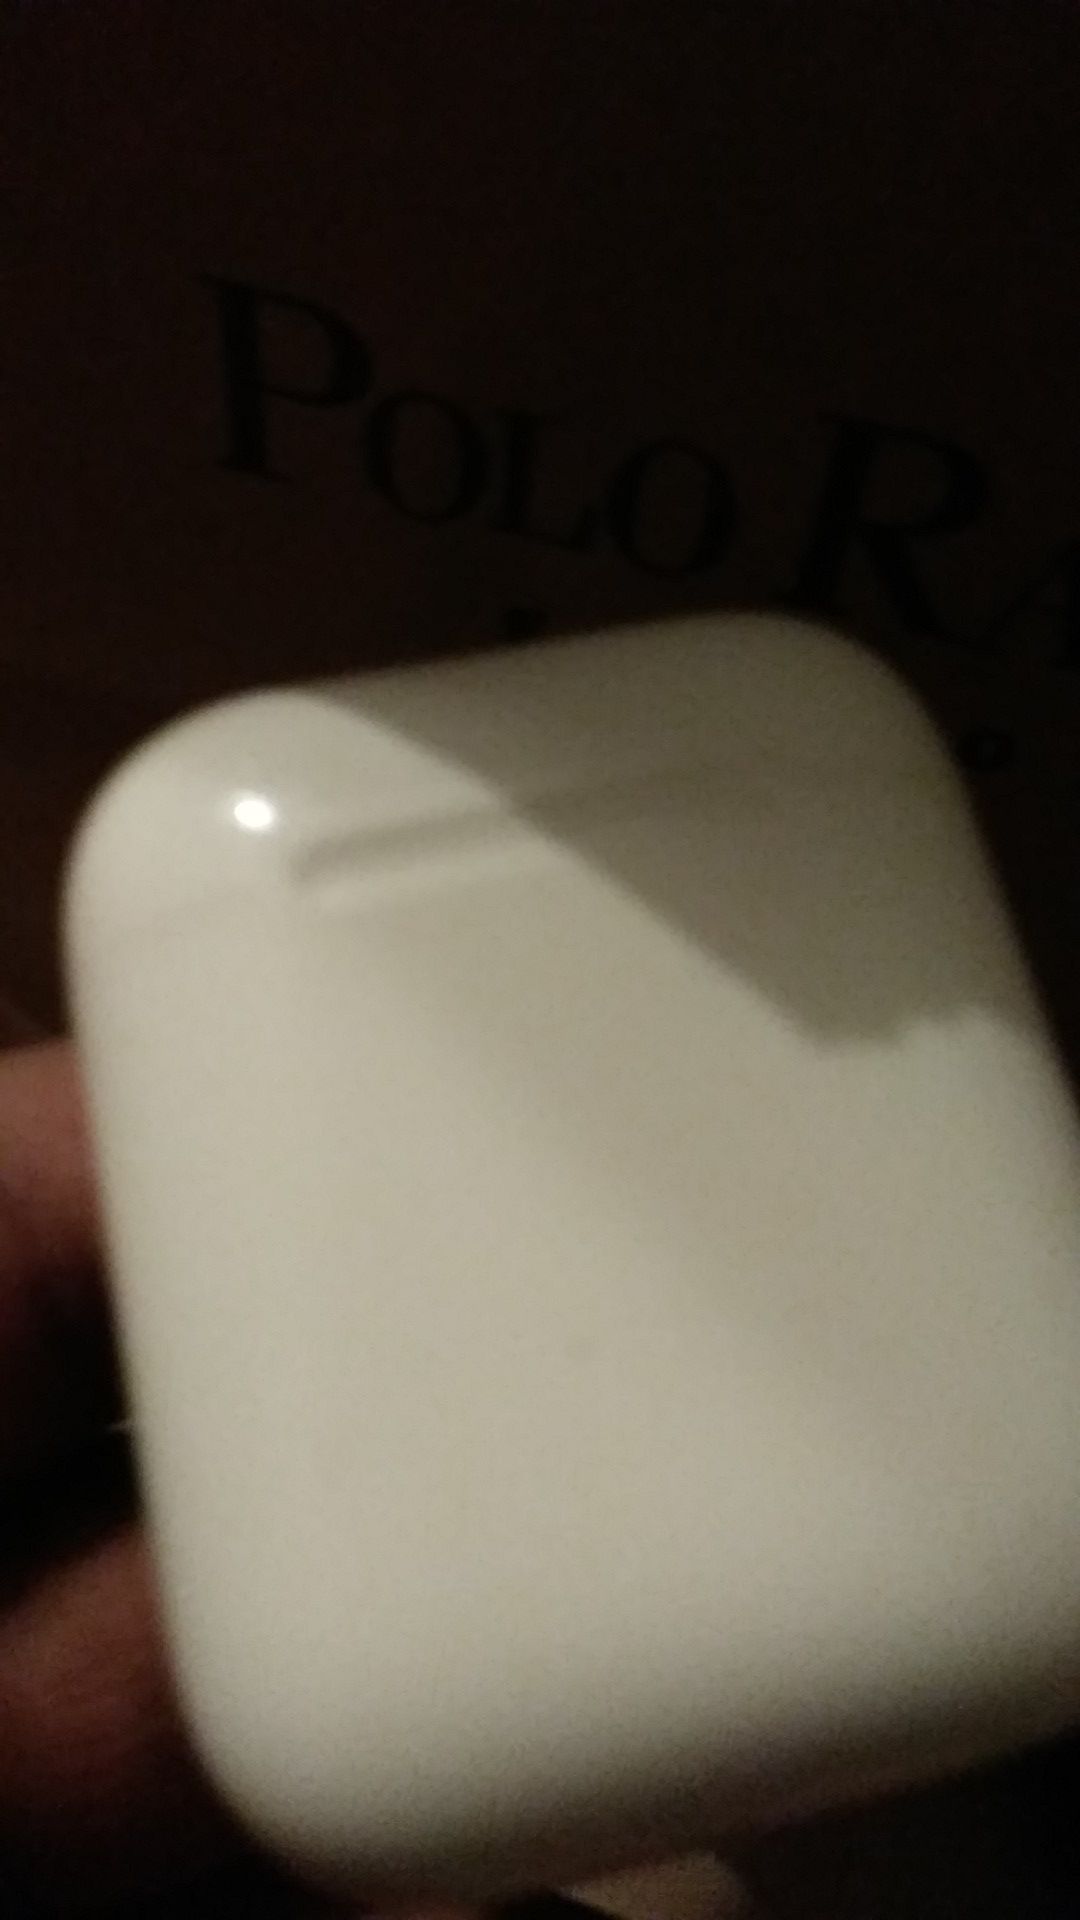 Air pods charging case